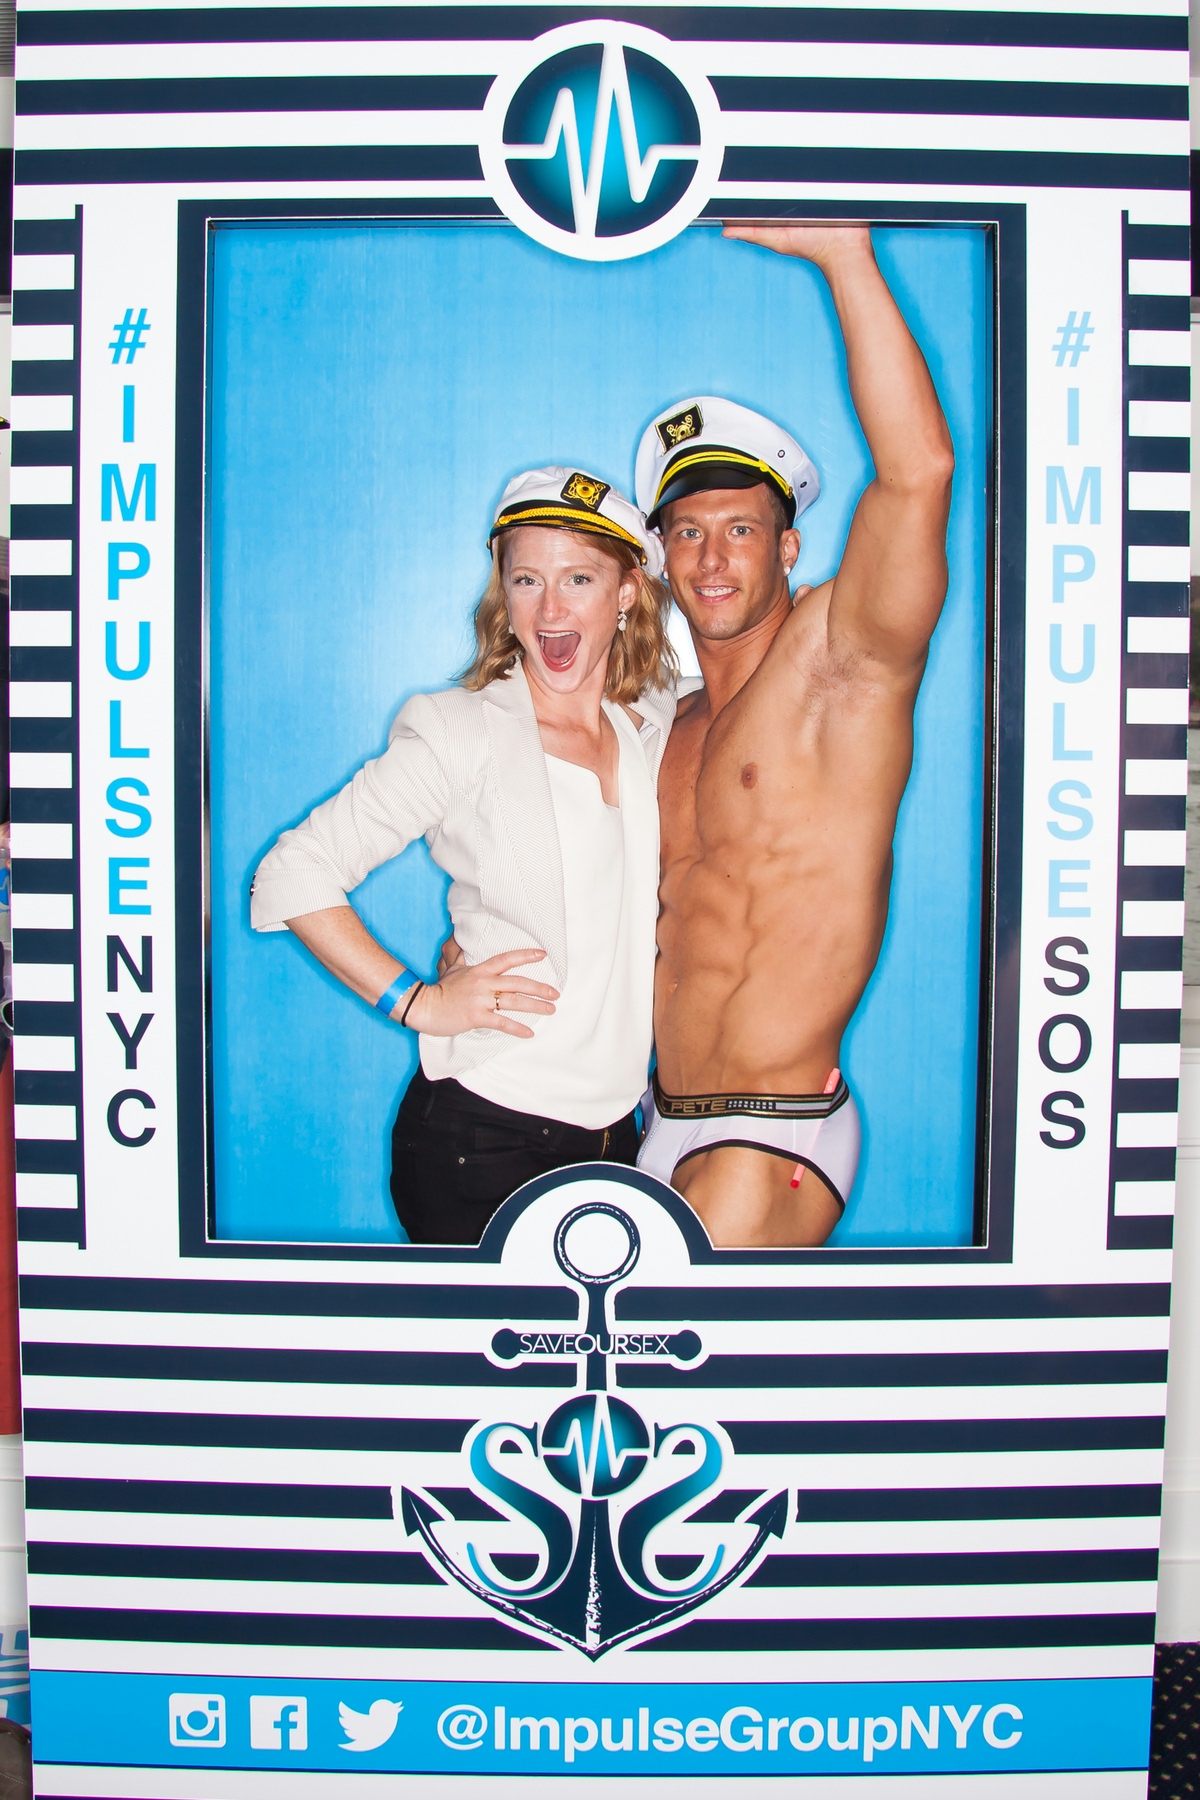 nyc pride event photo booth party rental